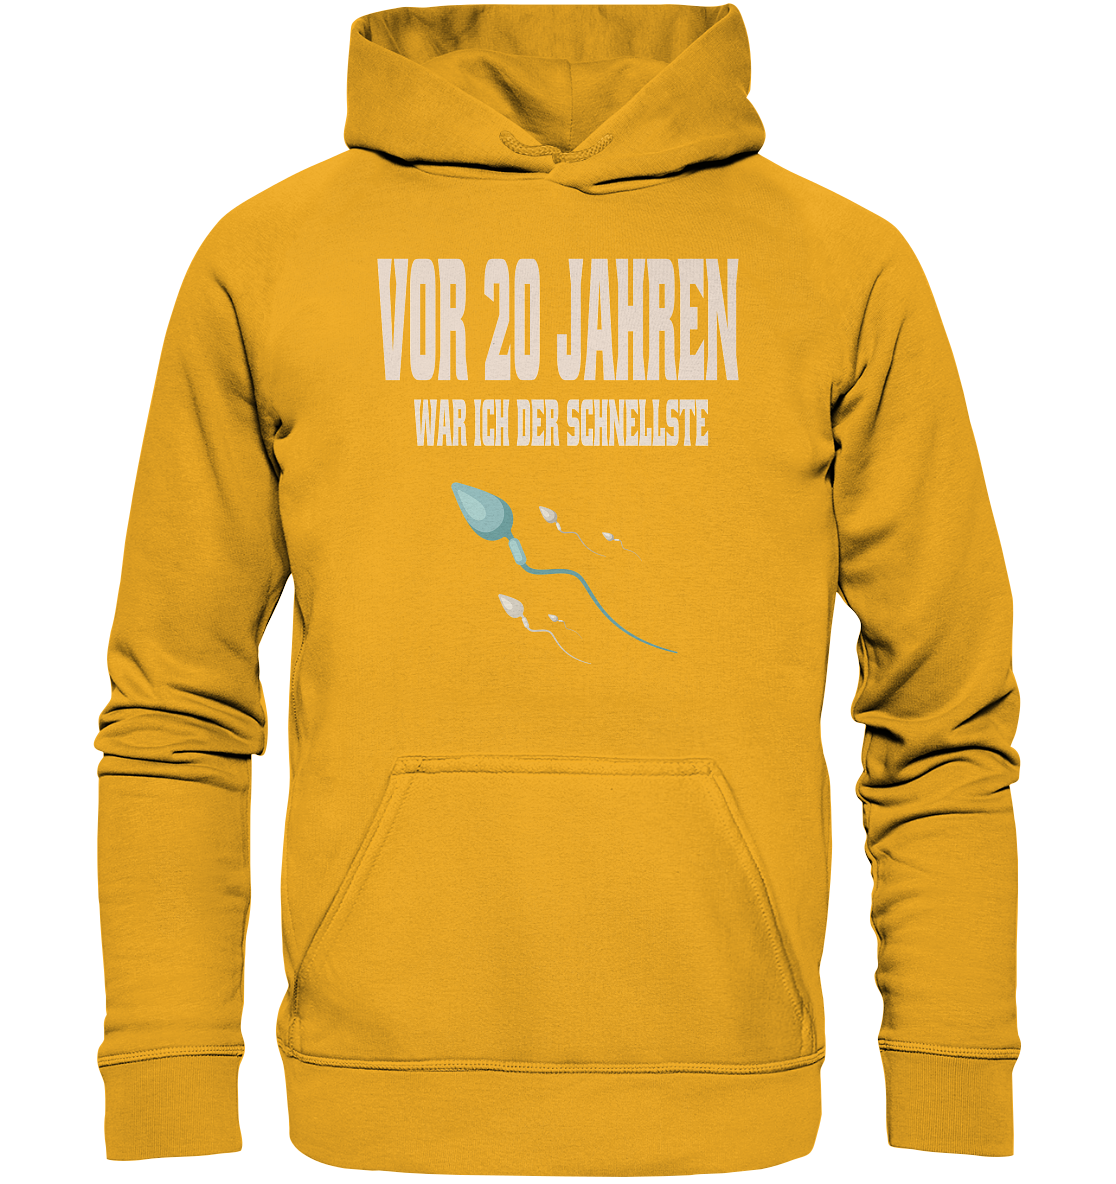 20 years ago I was the fastest, funny saying - basic unisex hoodie